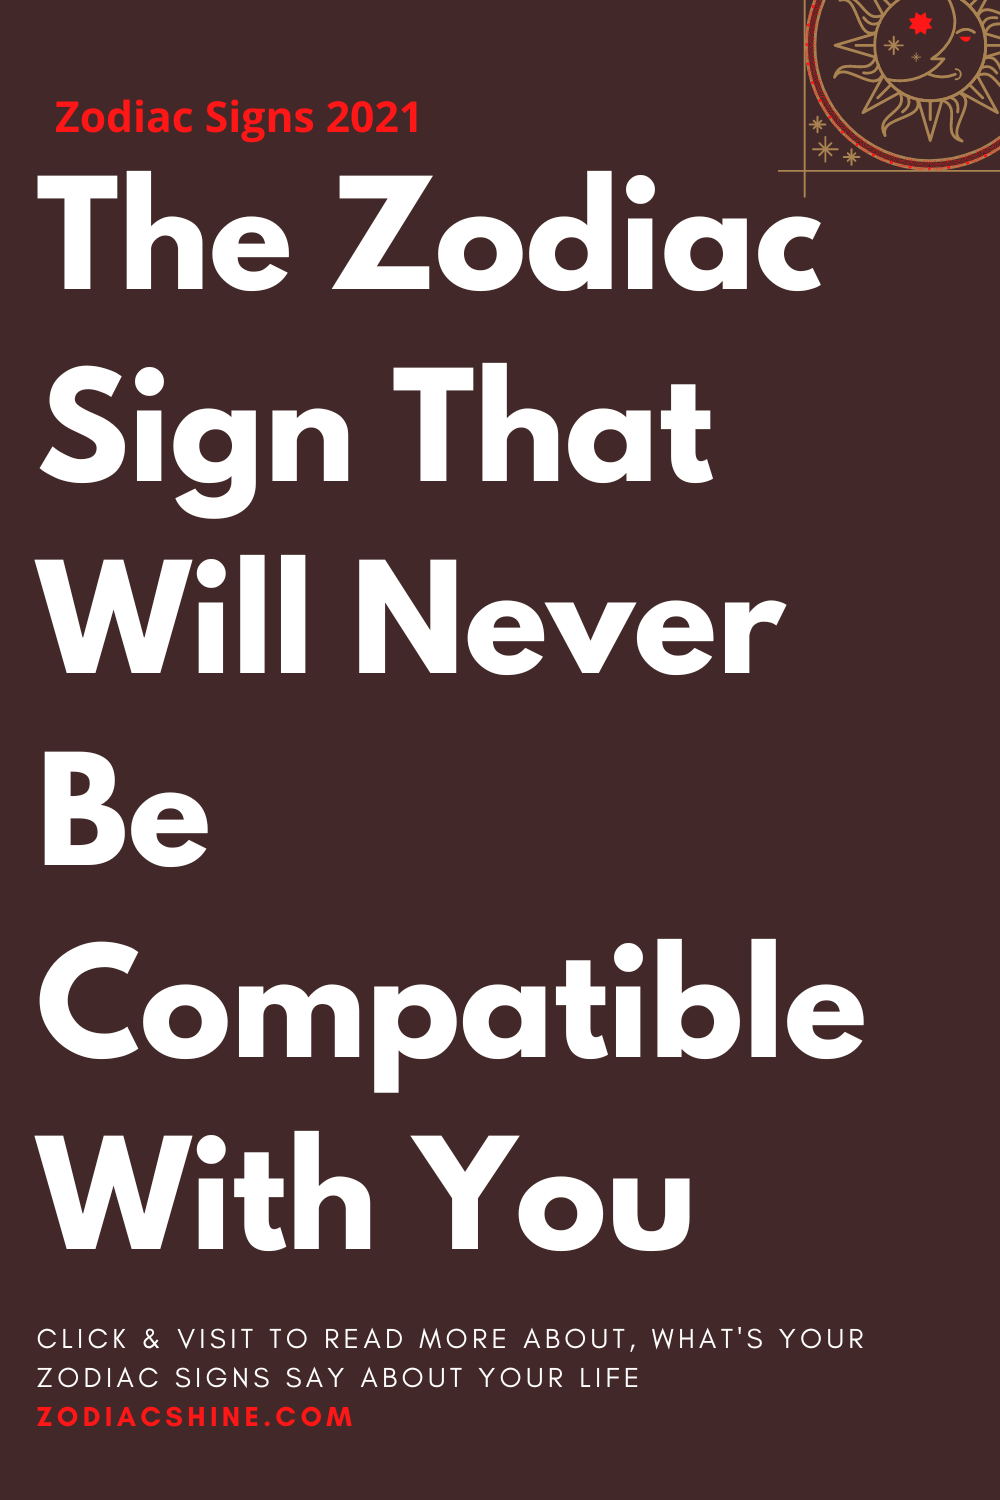 The Zodiac Sign That Will Never Be Compatible With You